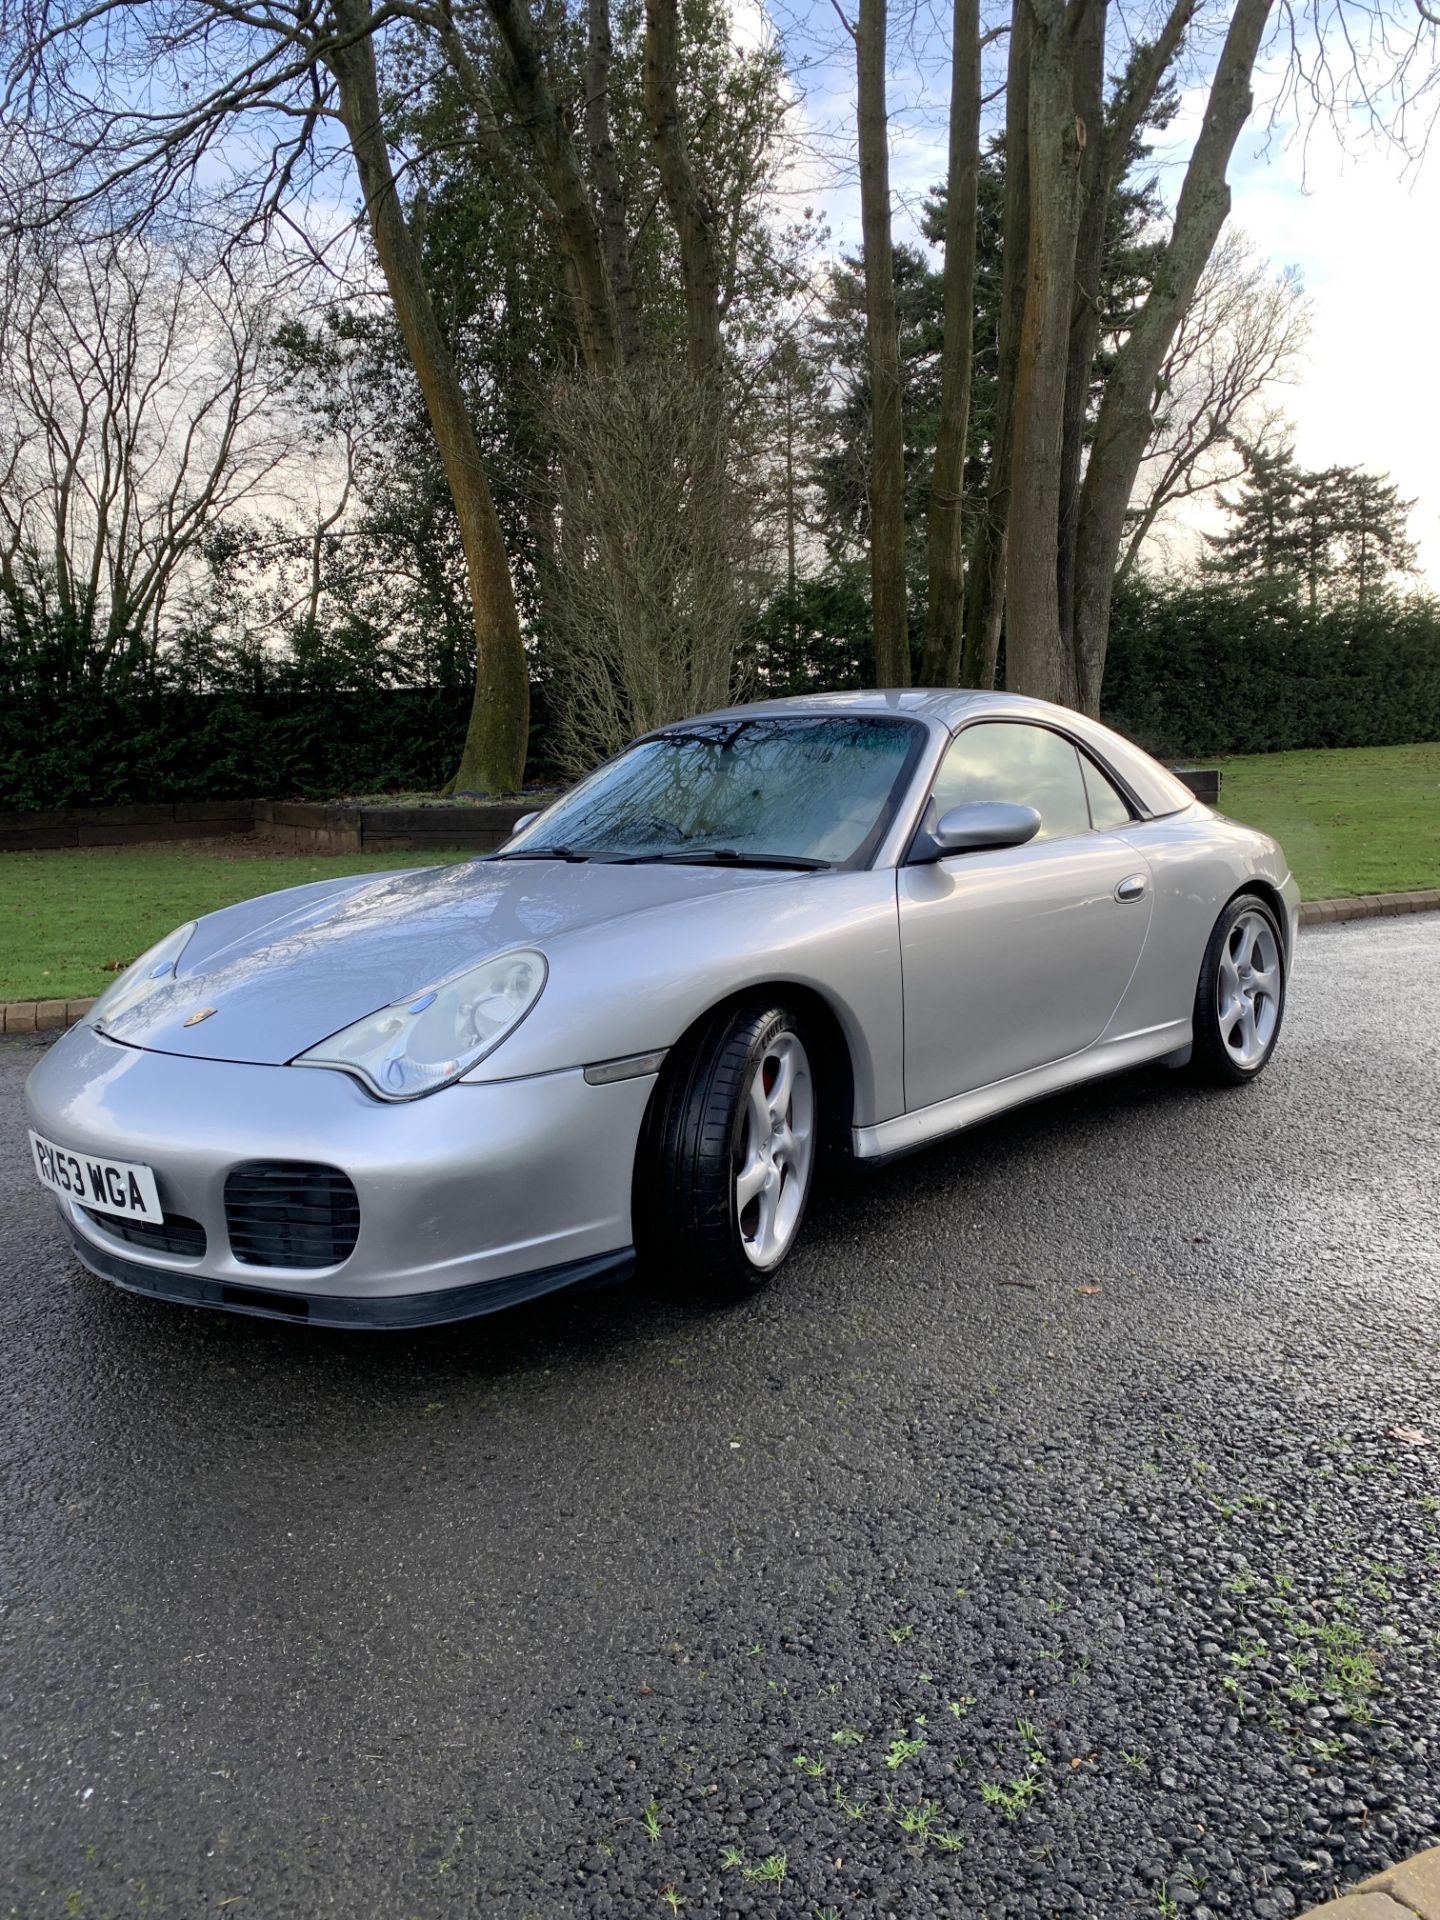 2003/53 REG PORSCHE 911 CARRERA 4S TIP S 3.6L PETROL SILVER CONVERTIBLE, SHOWING 3 FORMER KEEPERS - Image 2 of 10